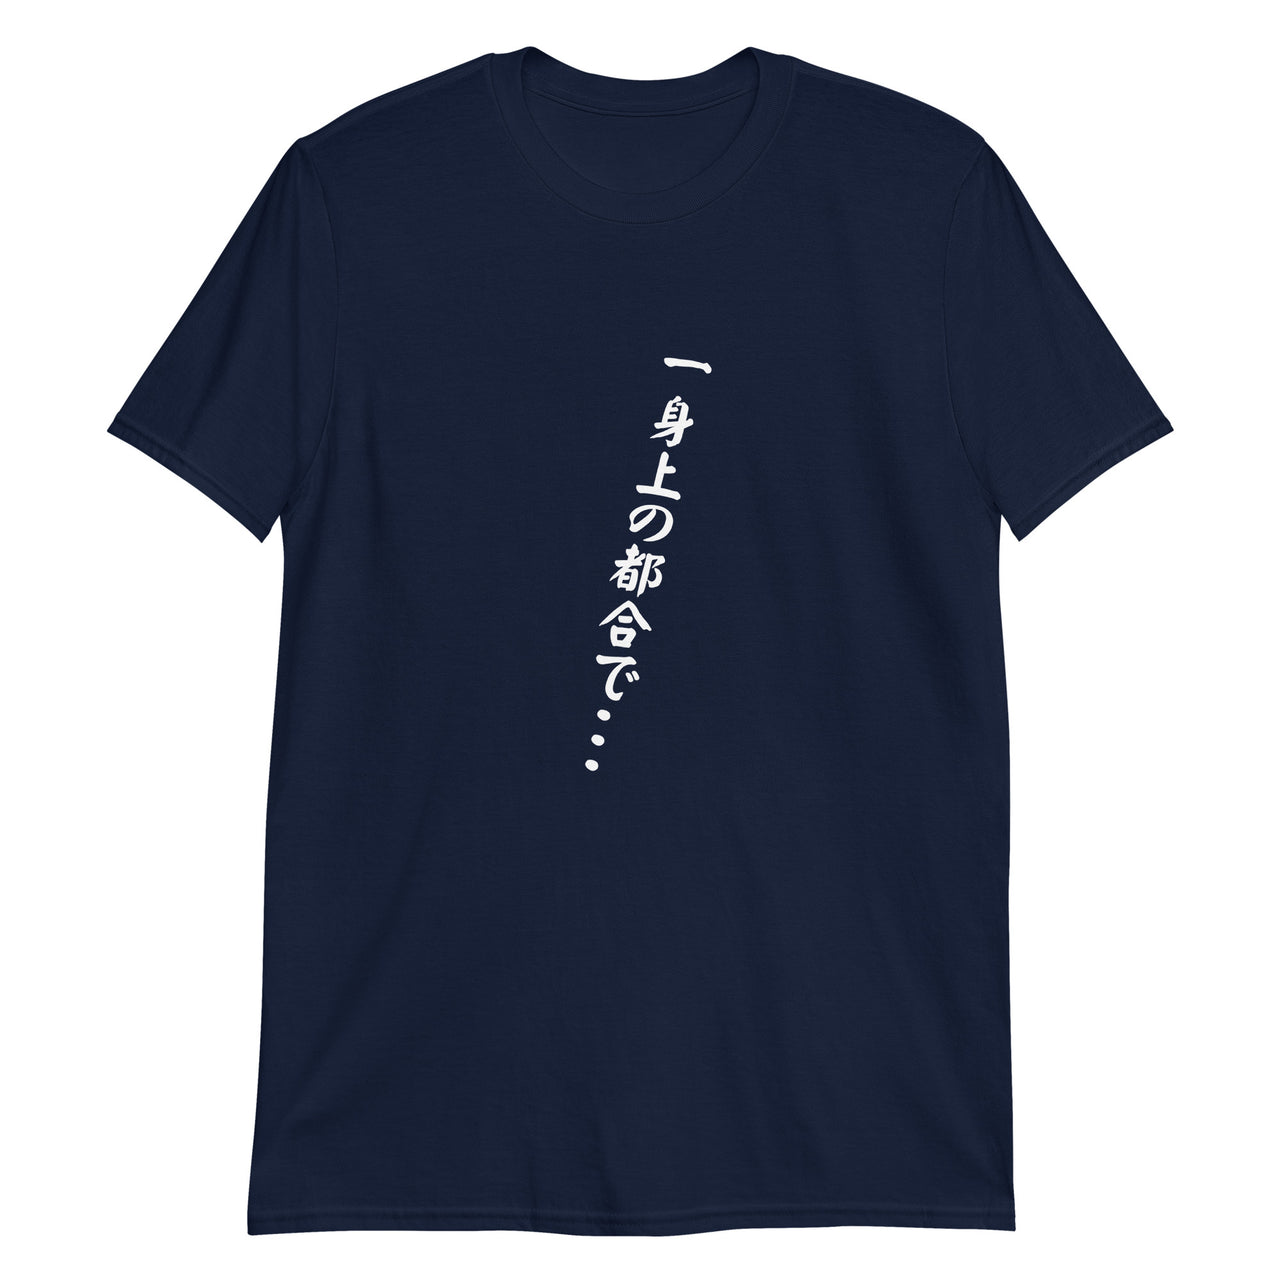 For Personal Reasons Japanese Short-Sleeve Unisex T-Shirt